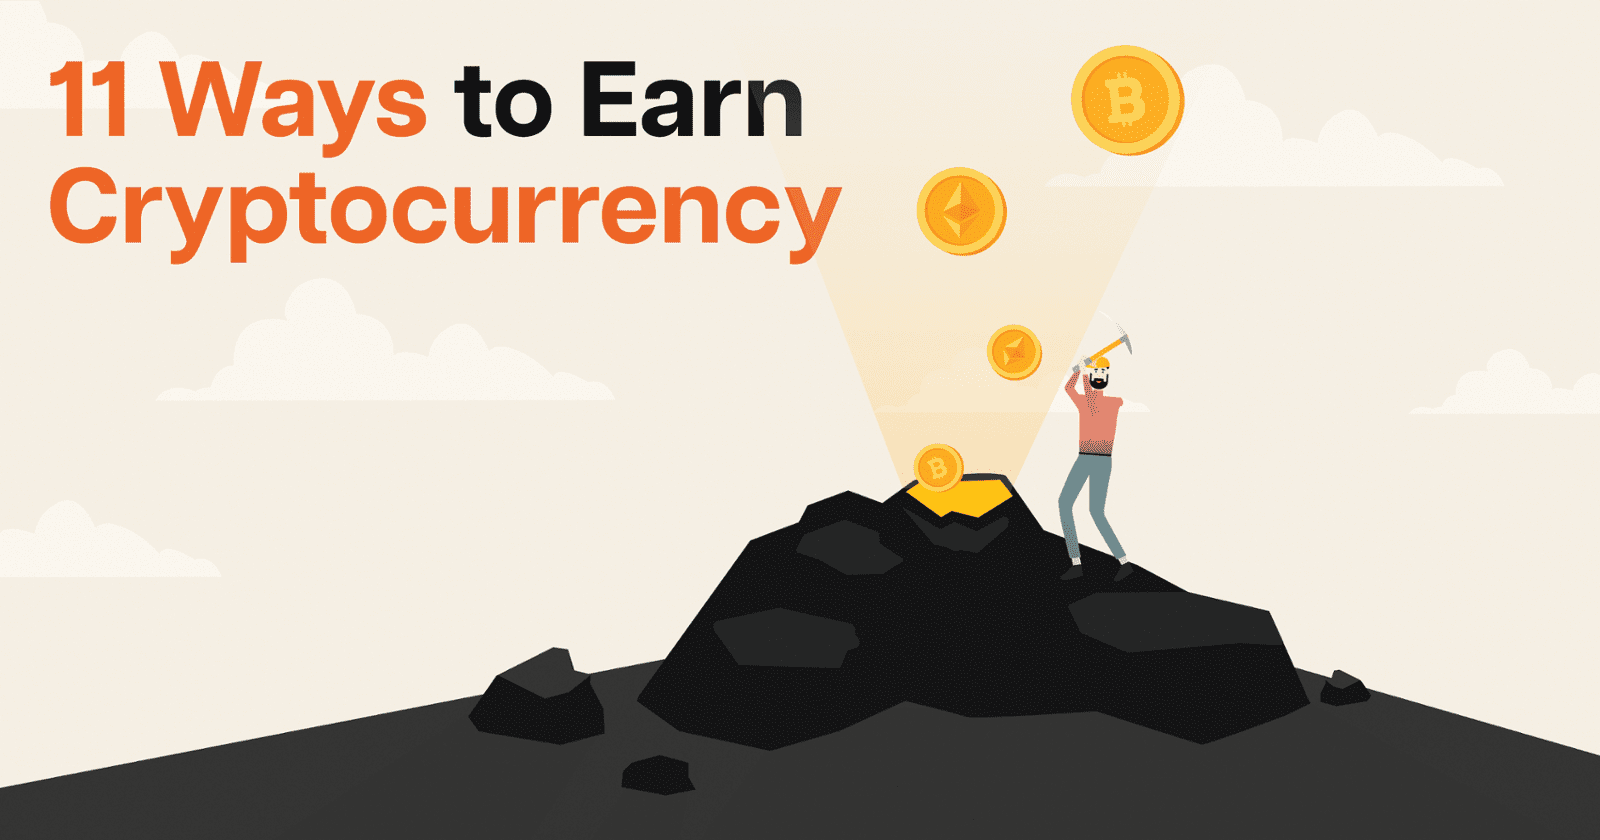 11 Ways to Earn Cryptocurrency